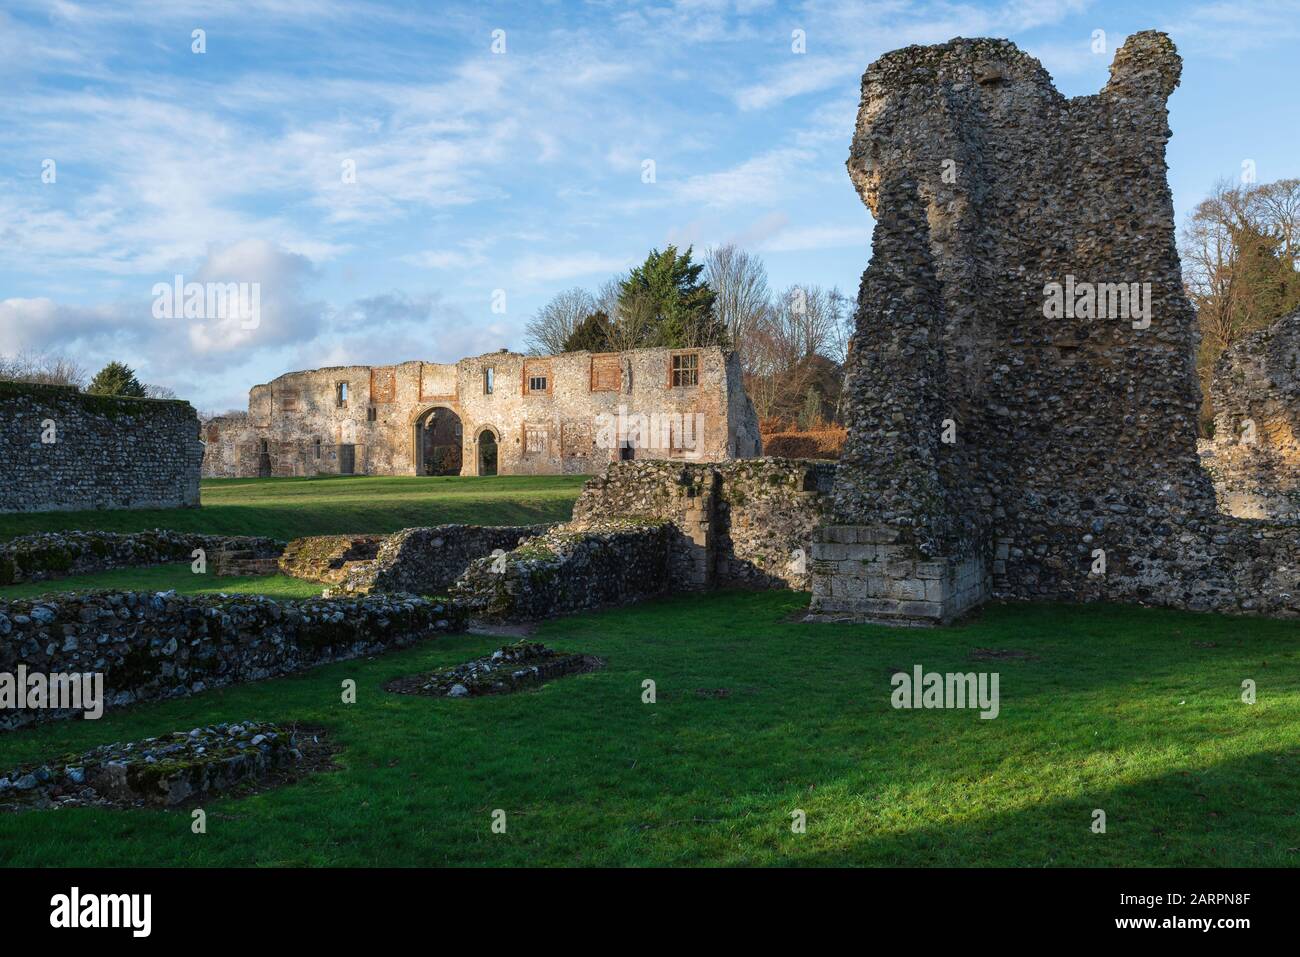 Thetford Priory, view of the medieval Prior's Lodging House flanked by ruined masonry of the Cluniac monastery building, Thetford, Norfolk, UK Stock Photo